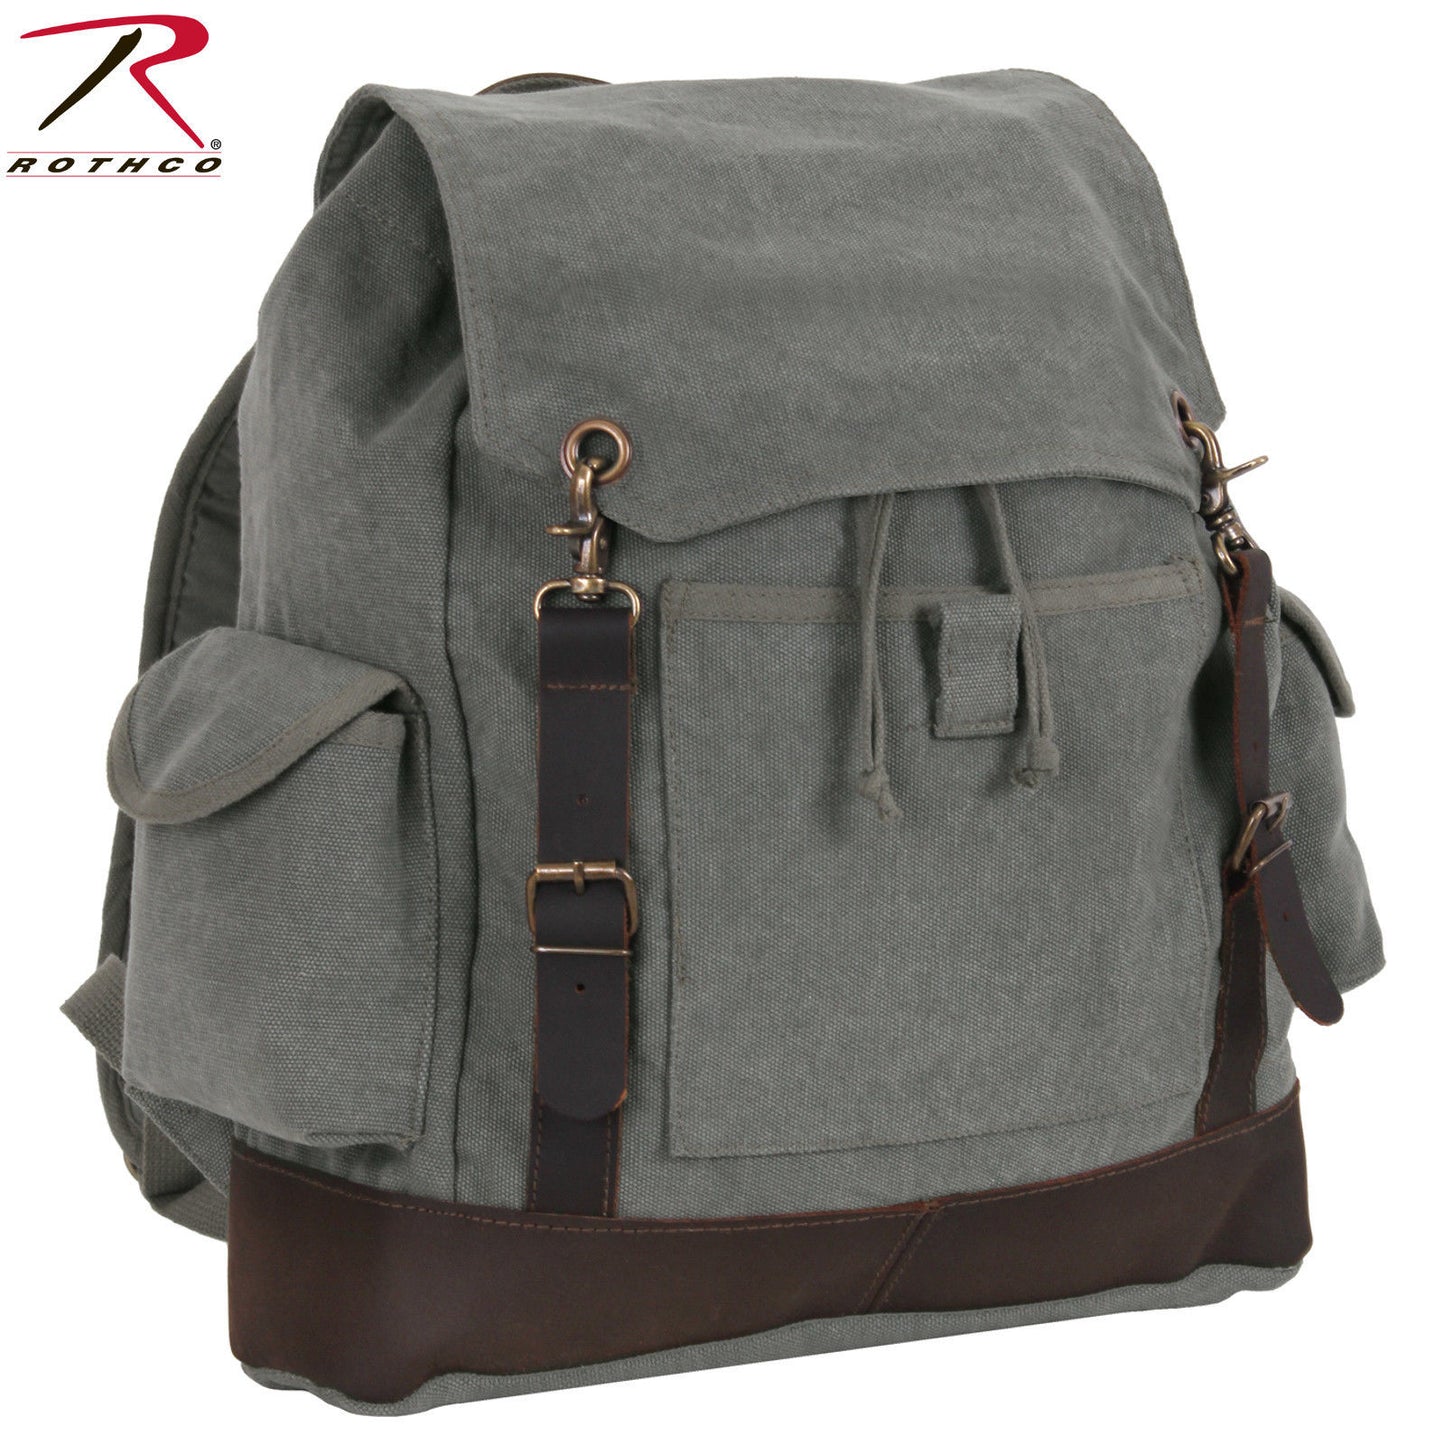 Rothco Vintage Expedition Rucksack - Charcoal Grey Cotton Canvas Backpack 8707